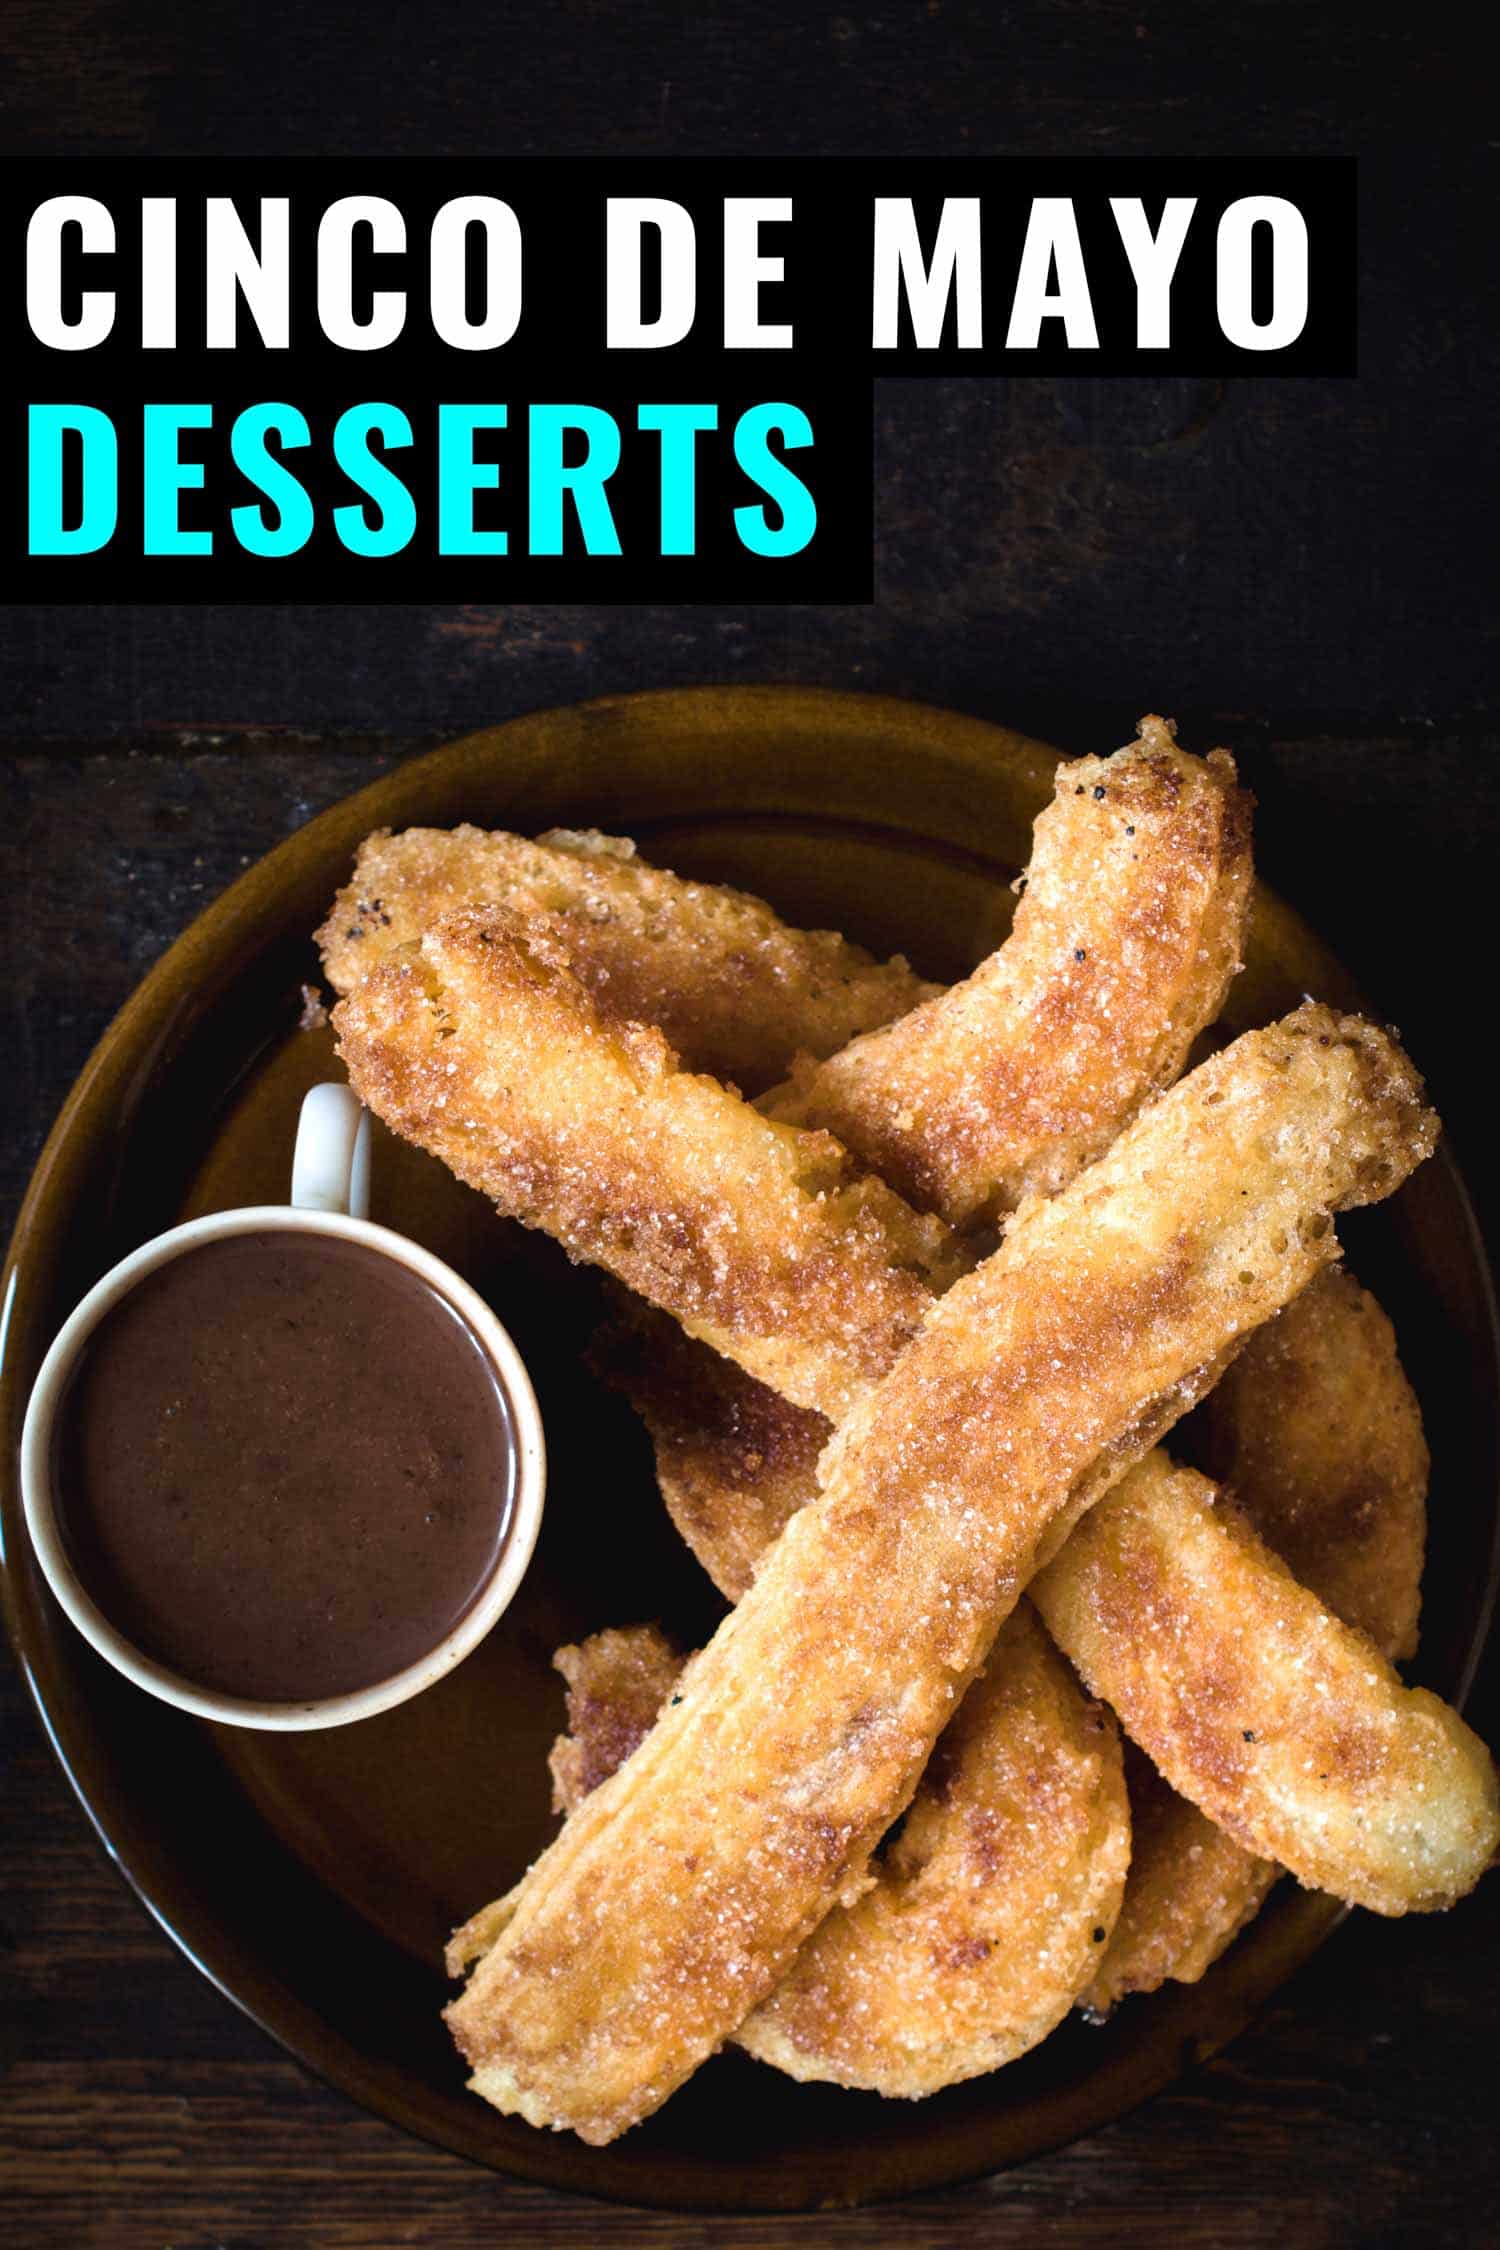 Churros and chocolate on a brown plate and brown background